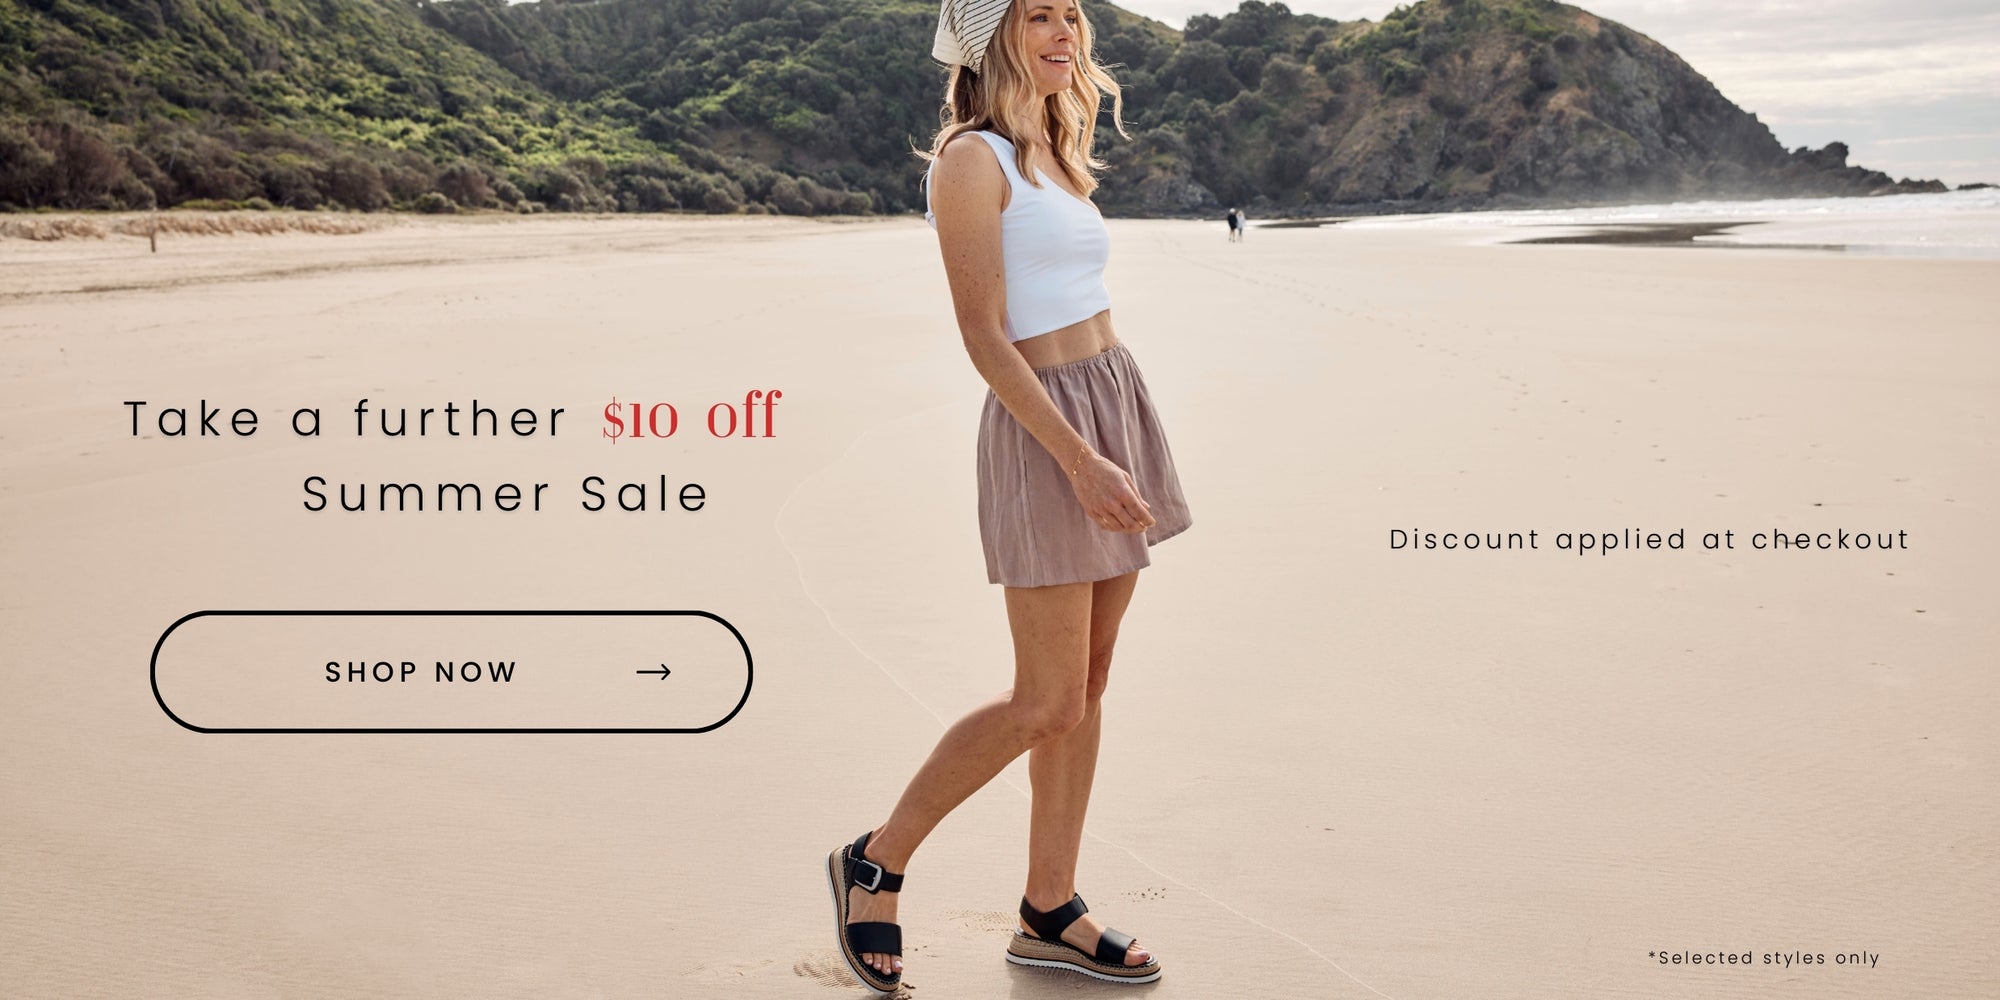 Woman walking on the beach wearing black sandals with a buckle. Text reads "Take a further $10 off Summer Sale. Shop Now. Discount applied at checkout. Selected styles only.'